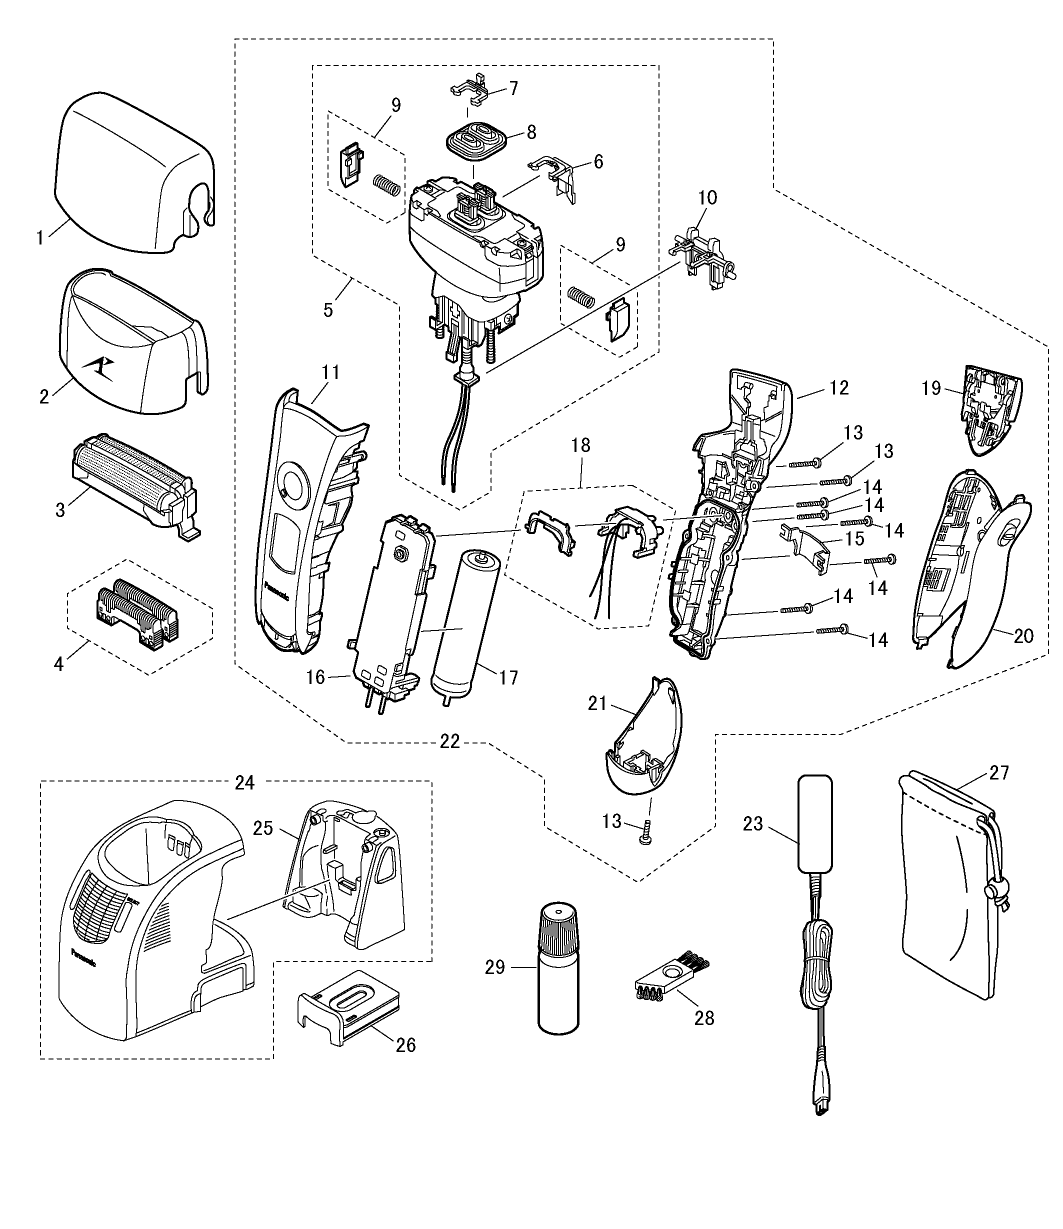 ES-LT71: Exploded View